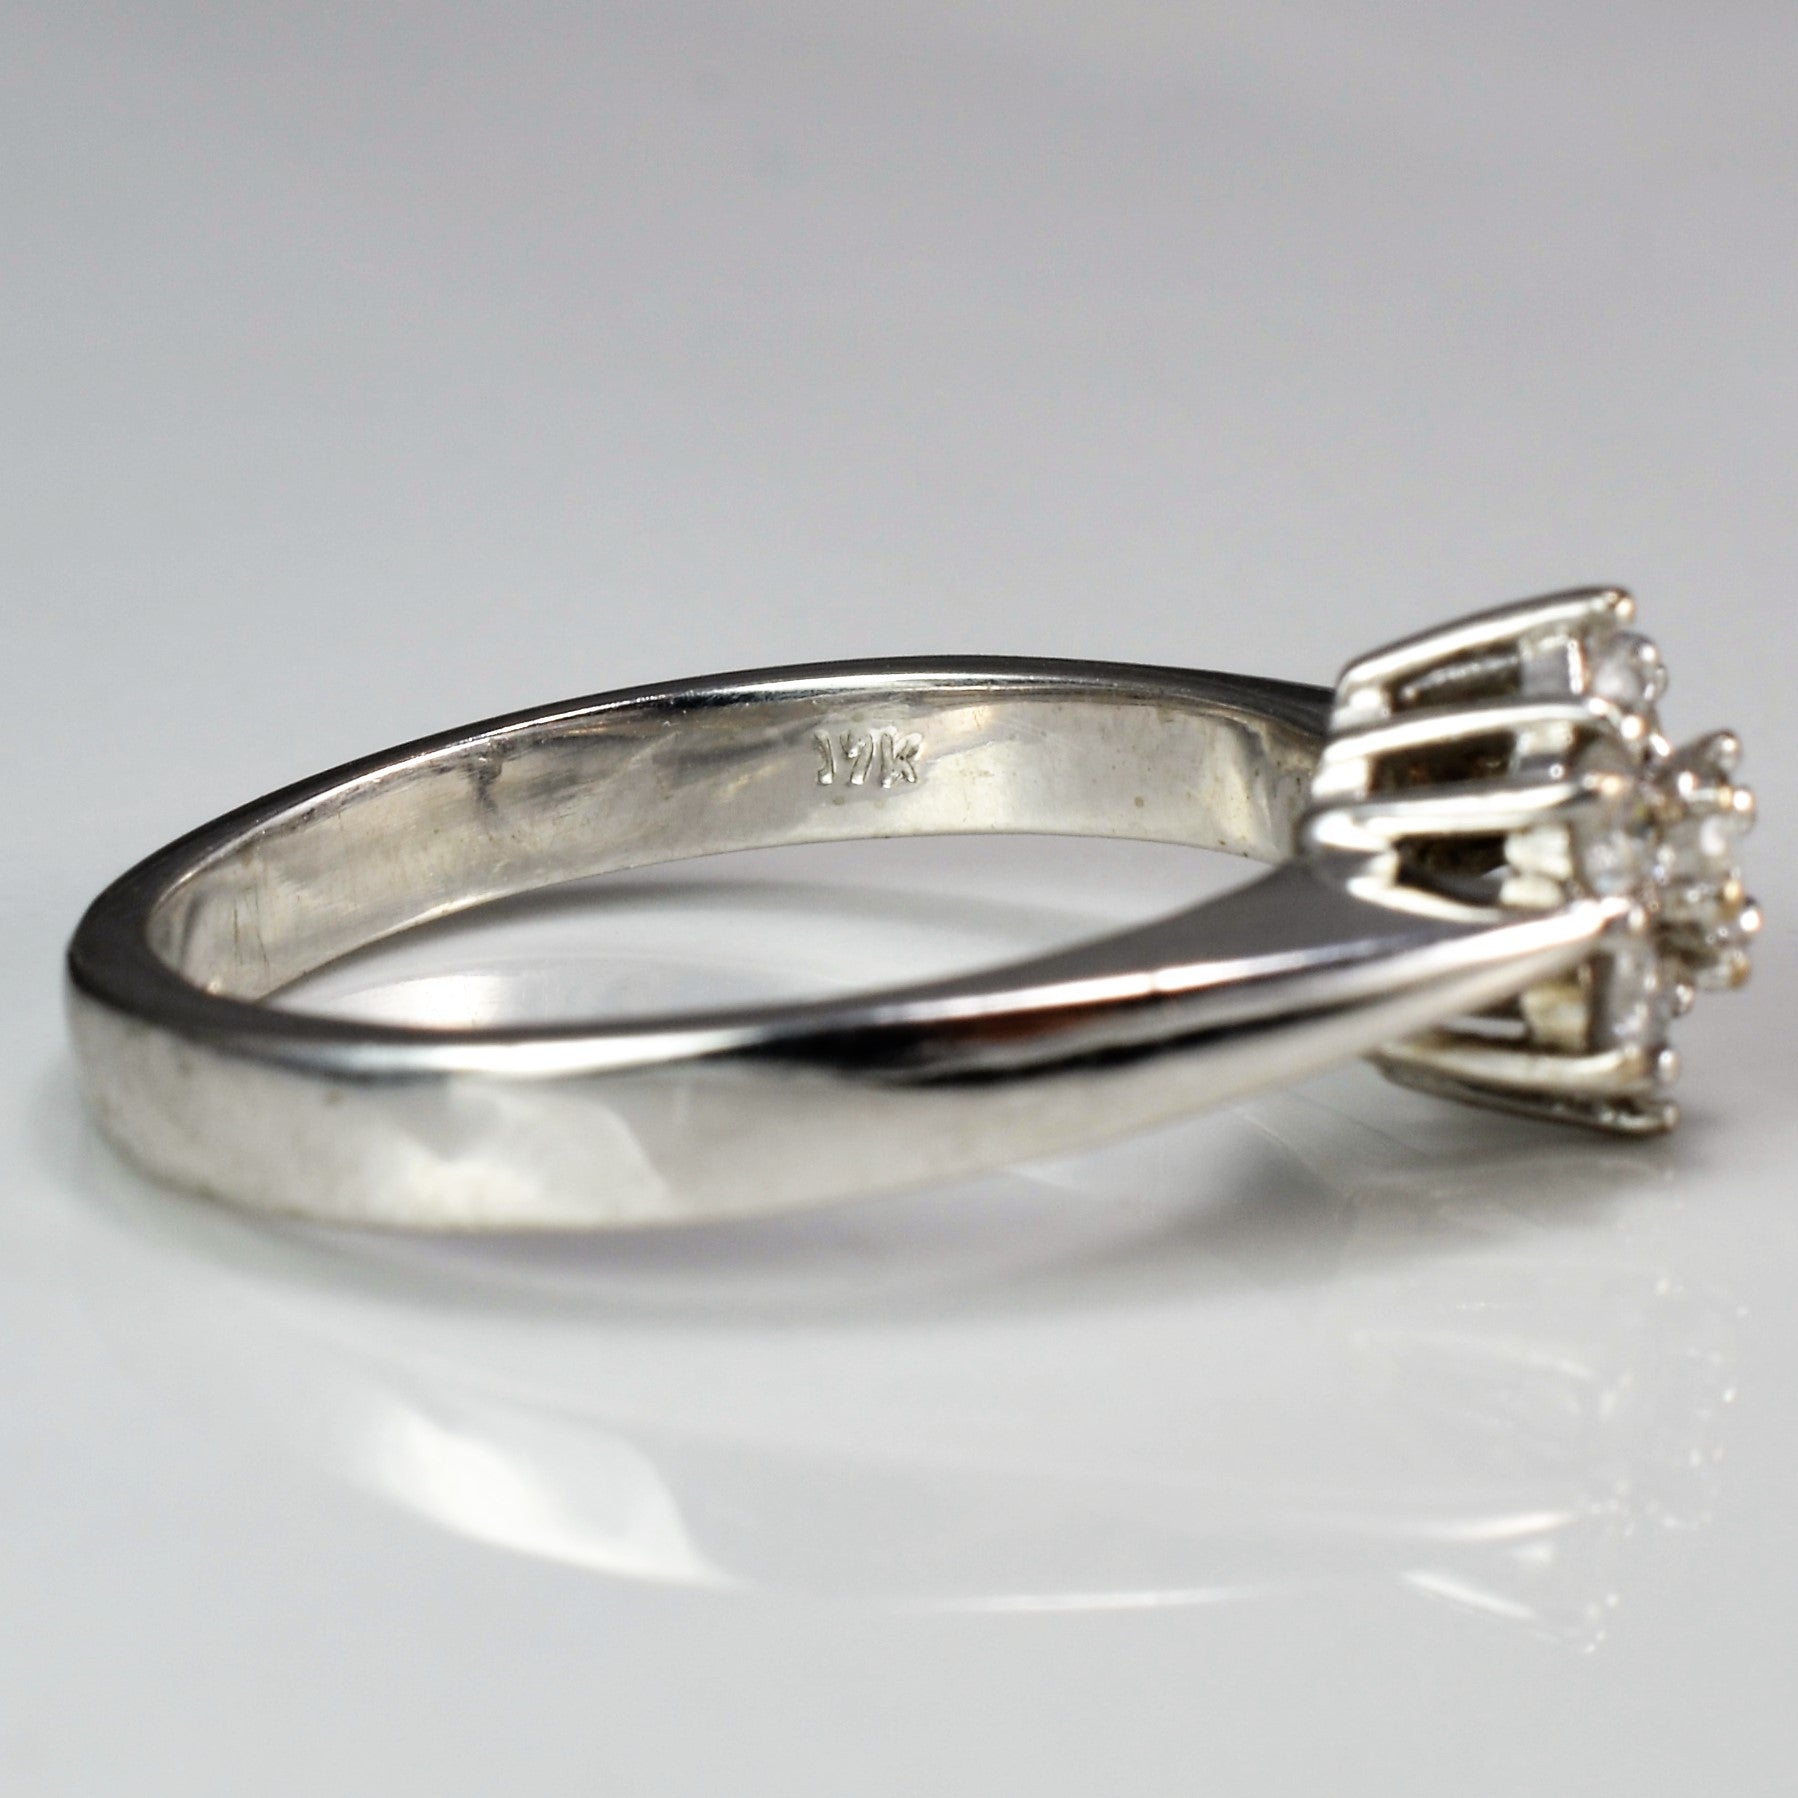 Tapered Floral Diamond Ring | 0.50 ctw, SZ 8.5 |